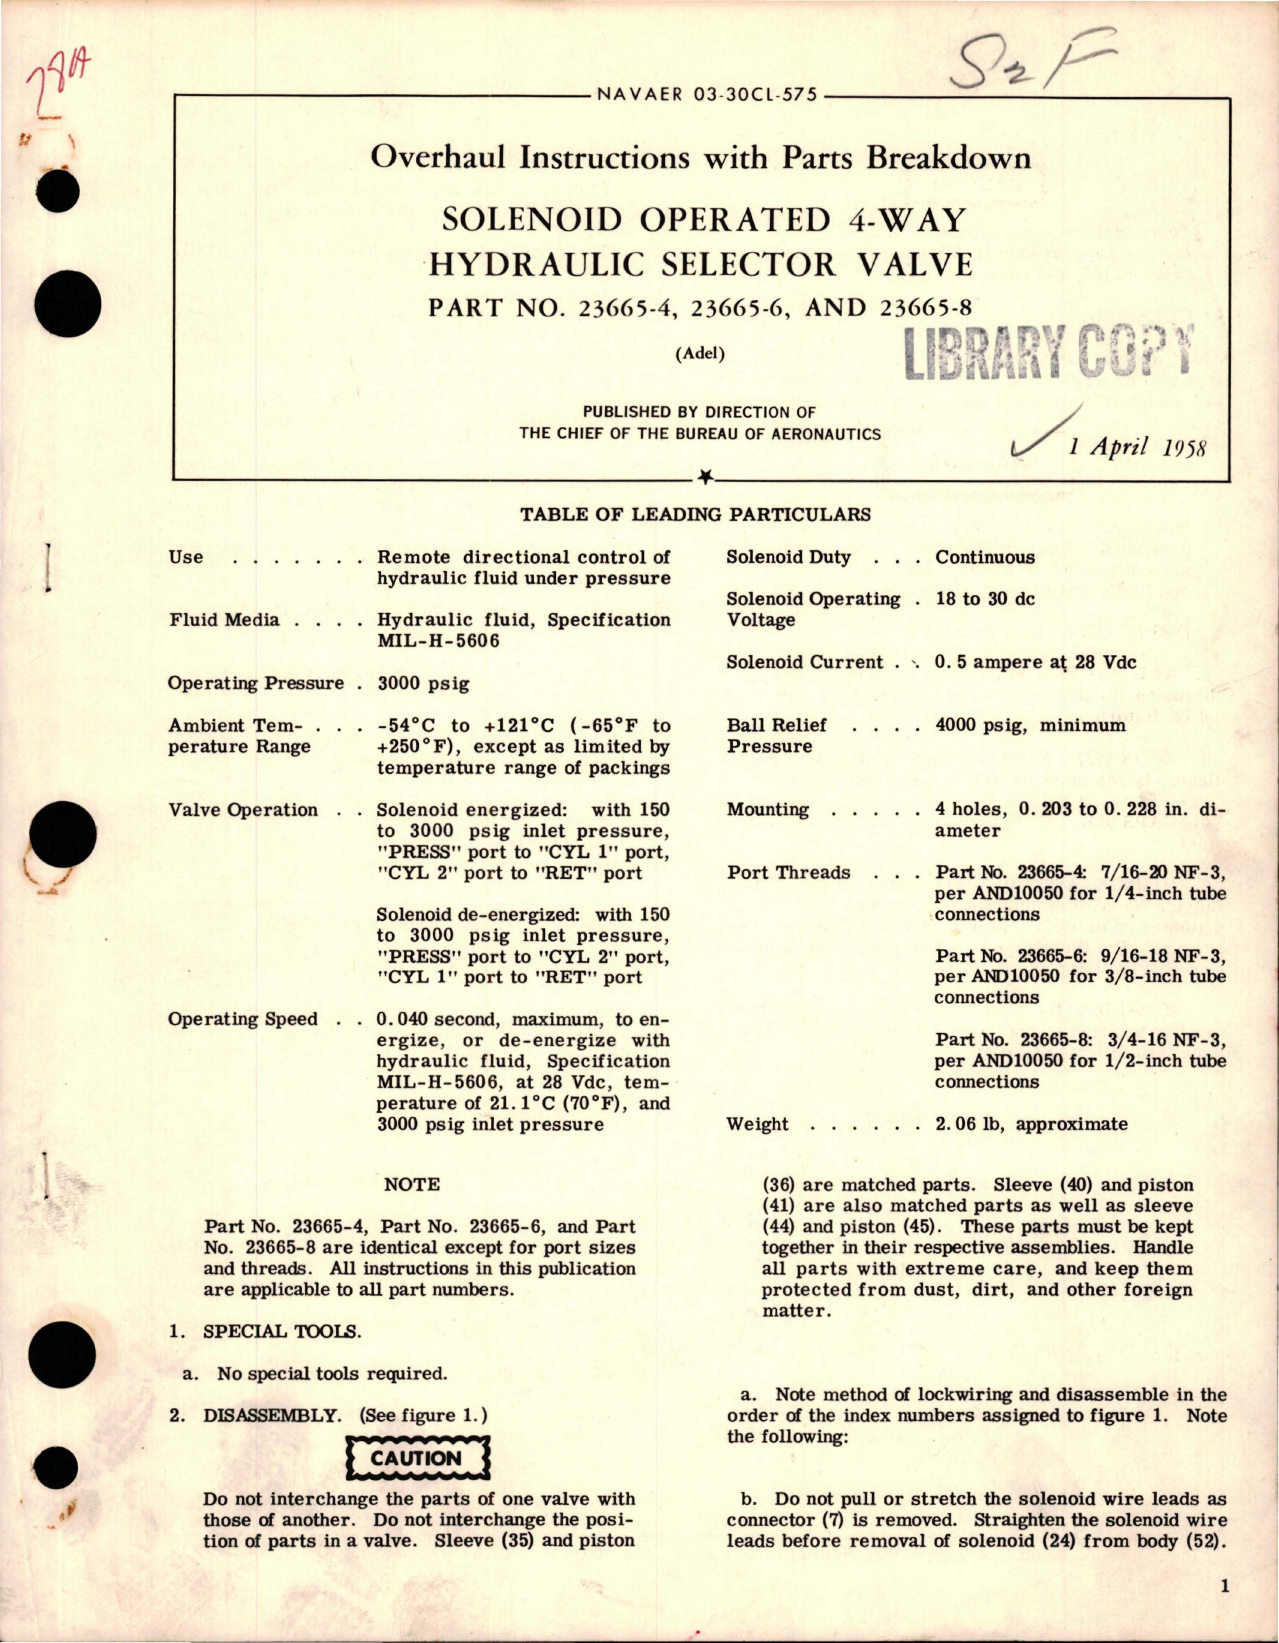 Sample page 1 from AirCorps Library document: Overhaul Instructions with Parts for Solenoid Operated 4-Way Hydraulic Selector Valve - Parts 23665-4, 23665-6 and 23665-8 